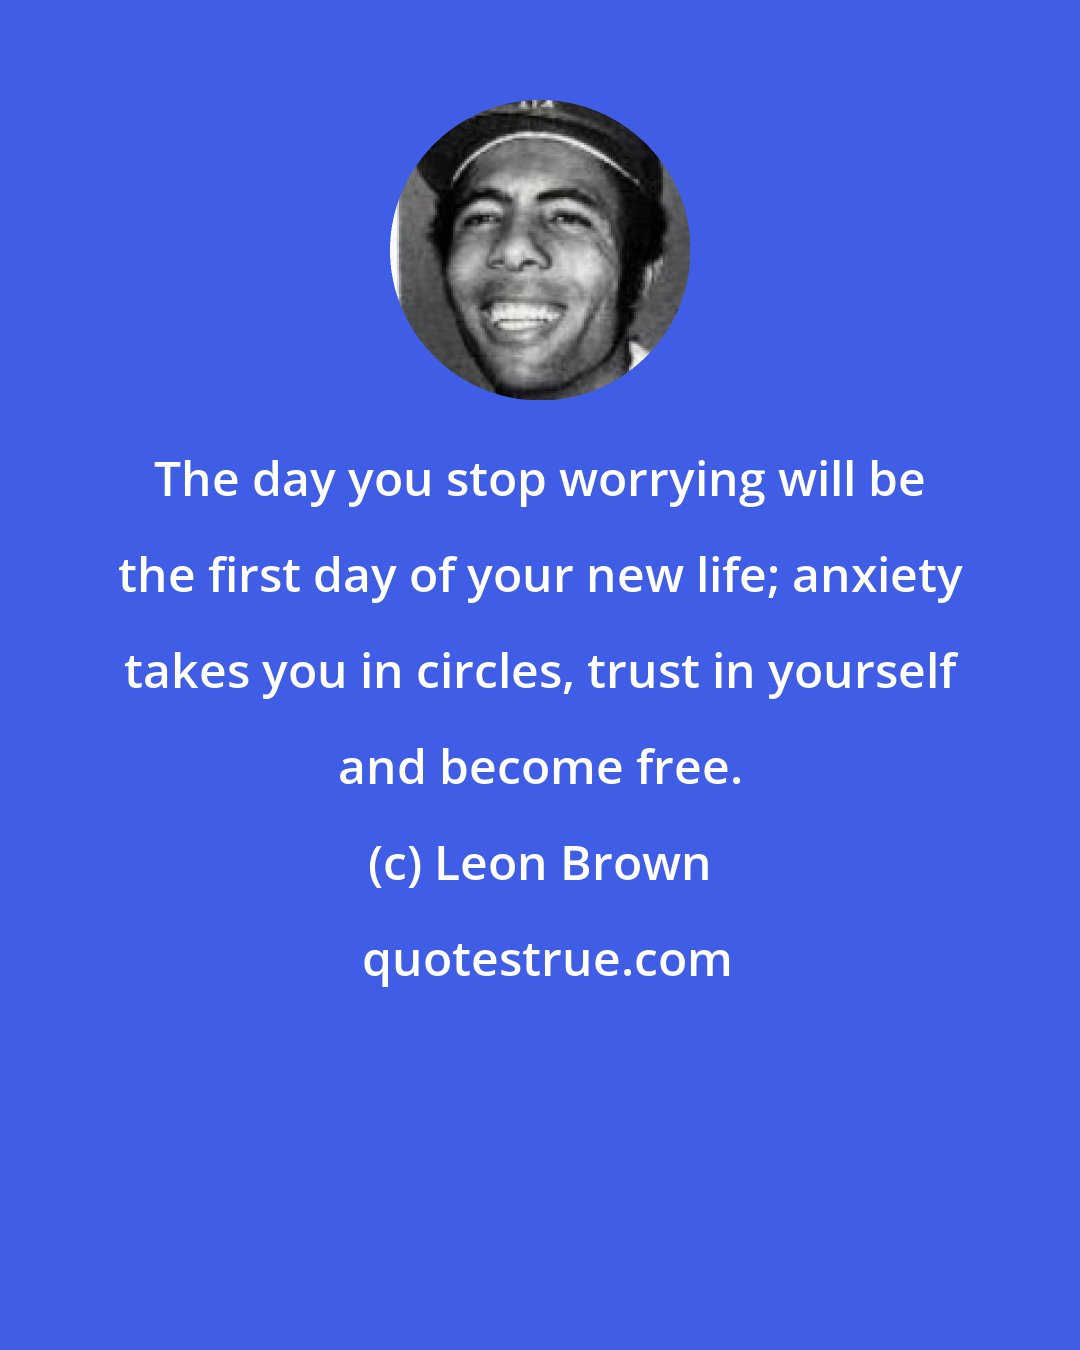 Leon Brown: The day you stop worrying will be the first day of your new life; anxiety takes you in circles, trust in yourself and become free.